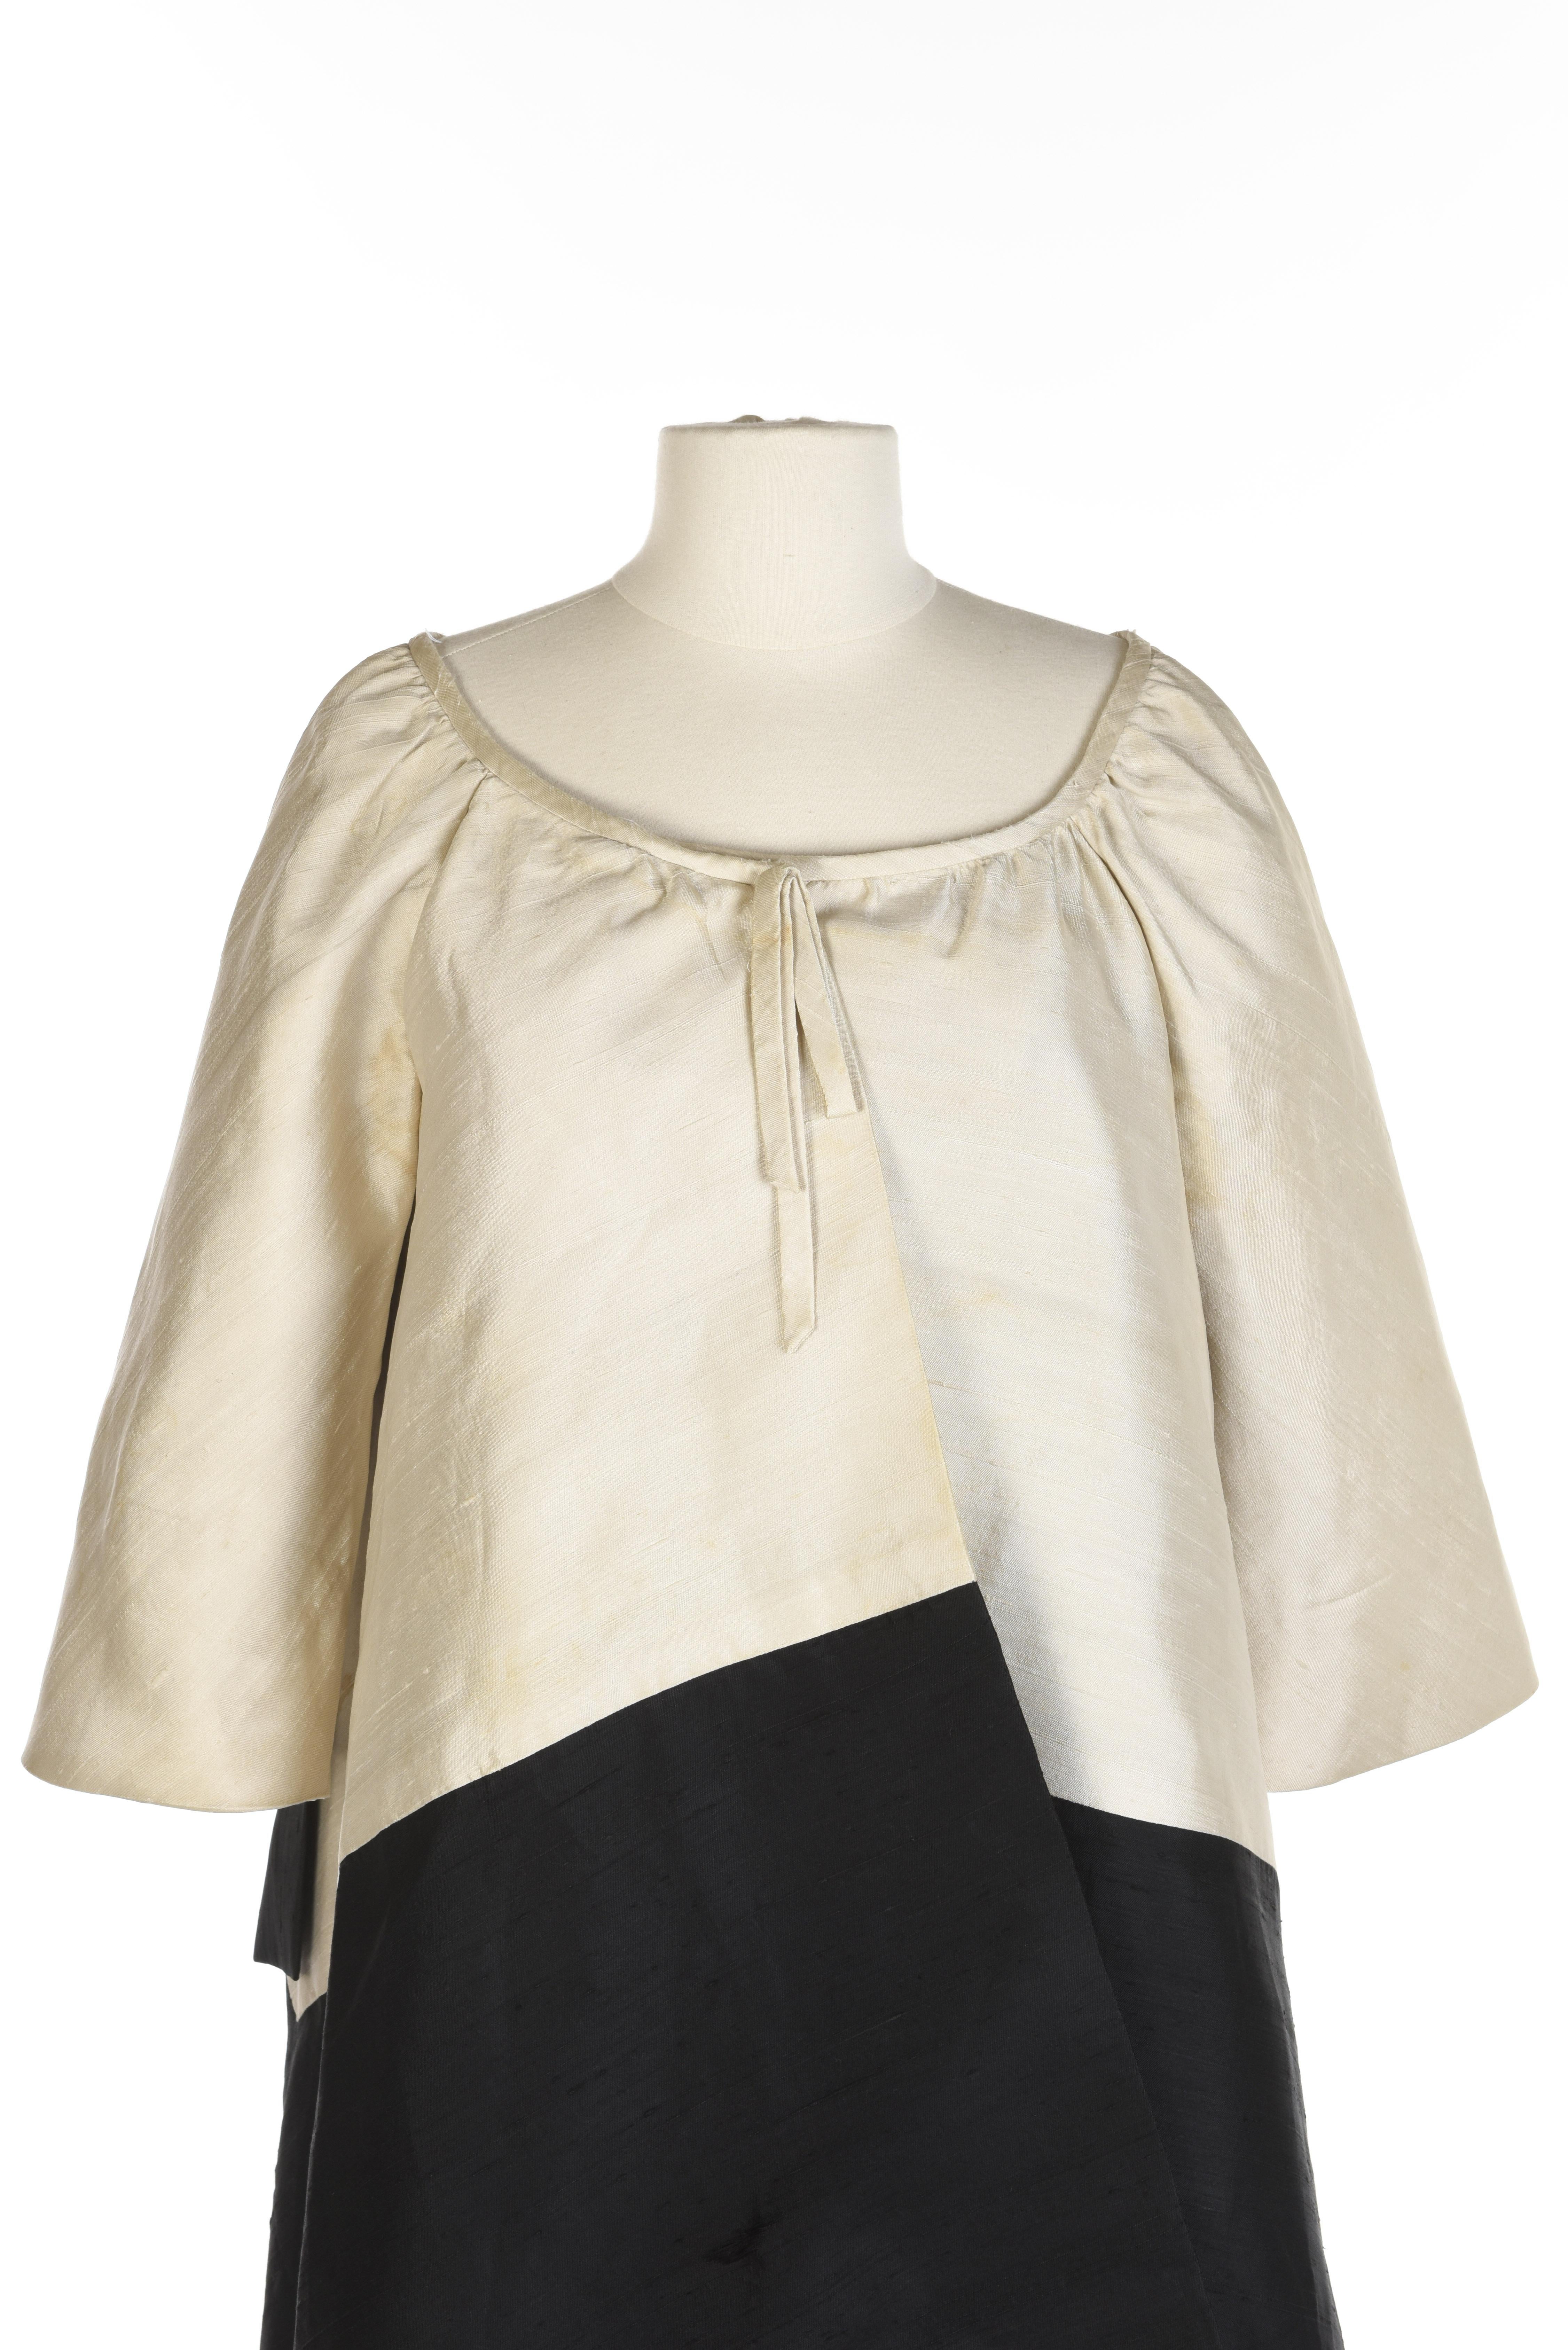 An Hubert de Givenchy French Couture Cream and Black silk Evening Set Circa 1965 For Sale 2